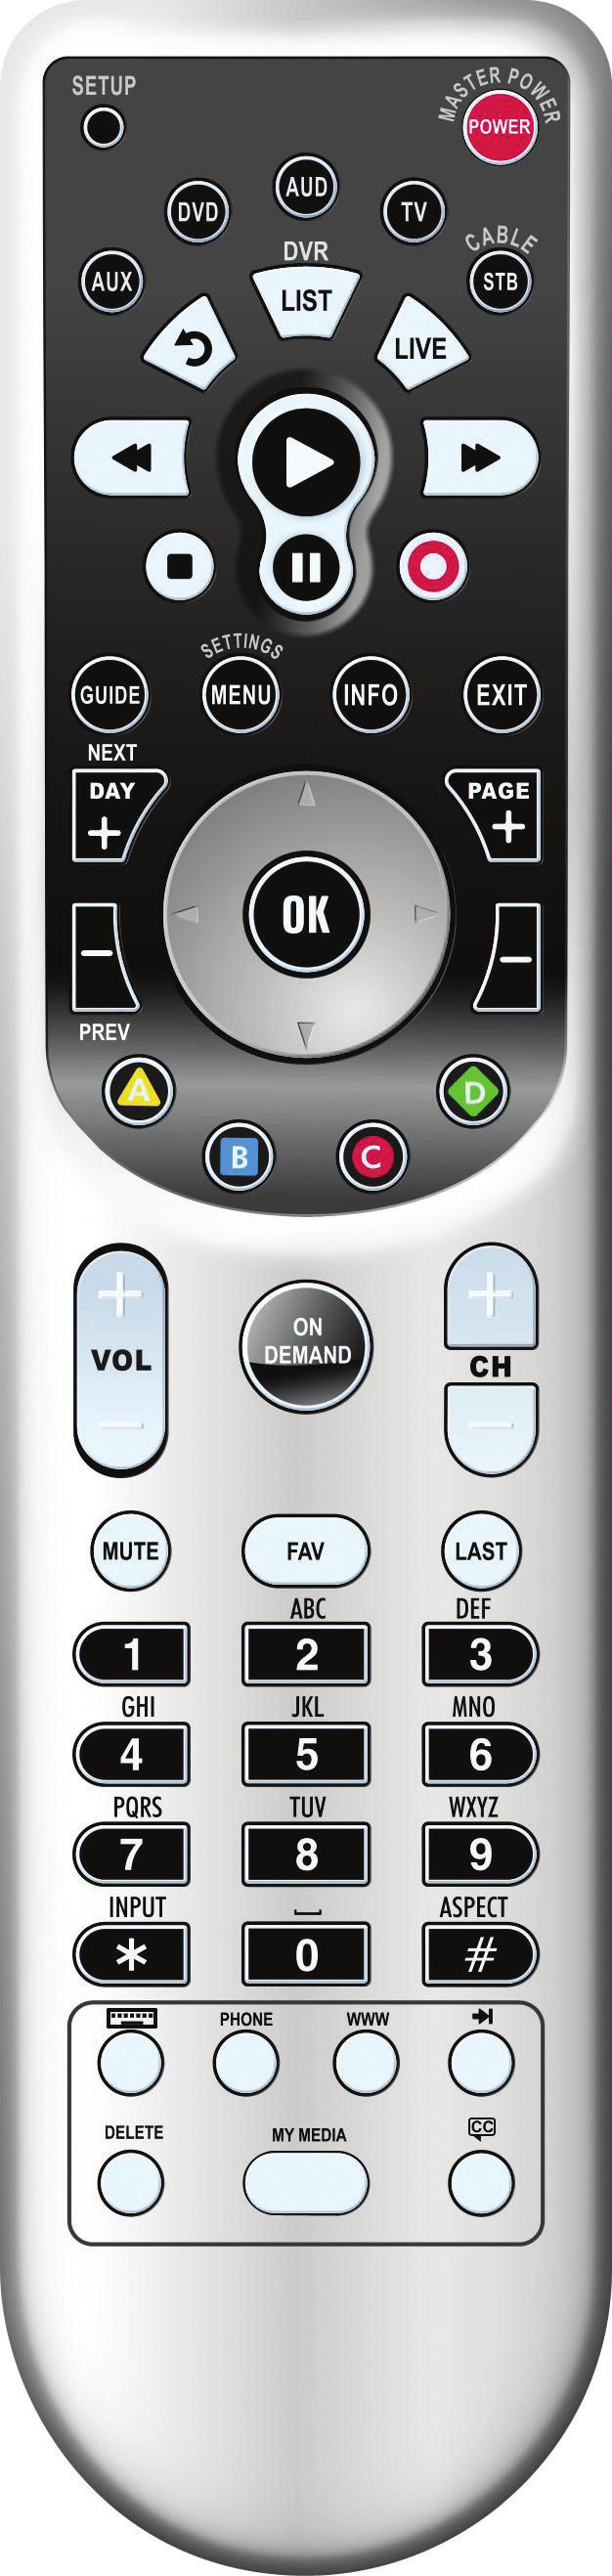 1 Remote Control Basics Device Selection Send commands to AUX, DVD, AUD, TV or STB DVR Controls Go back, bring up DVR list, go to live TV MENU Displays Menubar GUIDE Displays Guide DAY - / + View